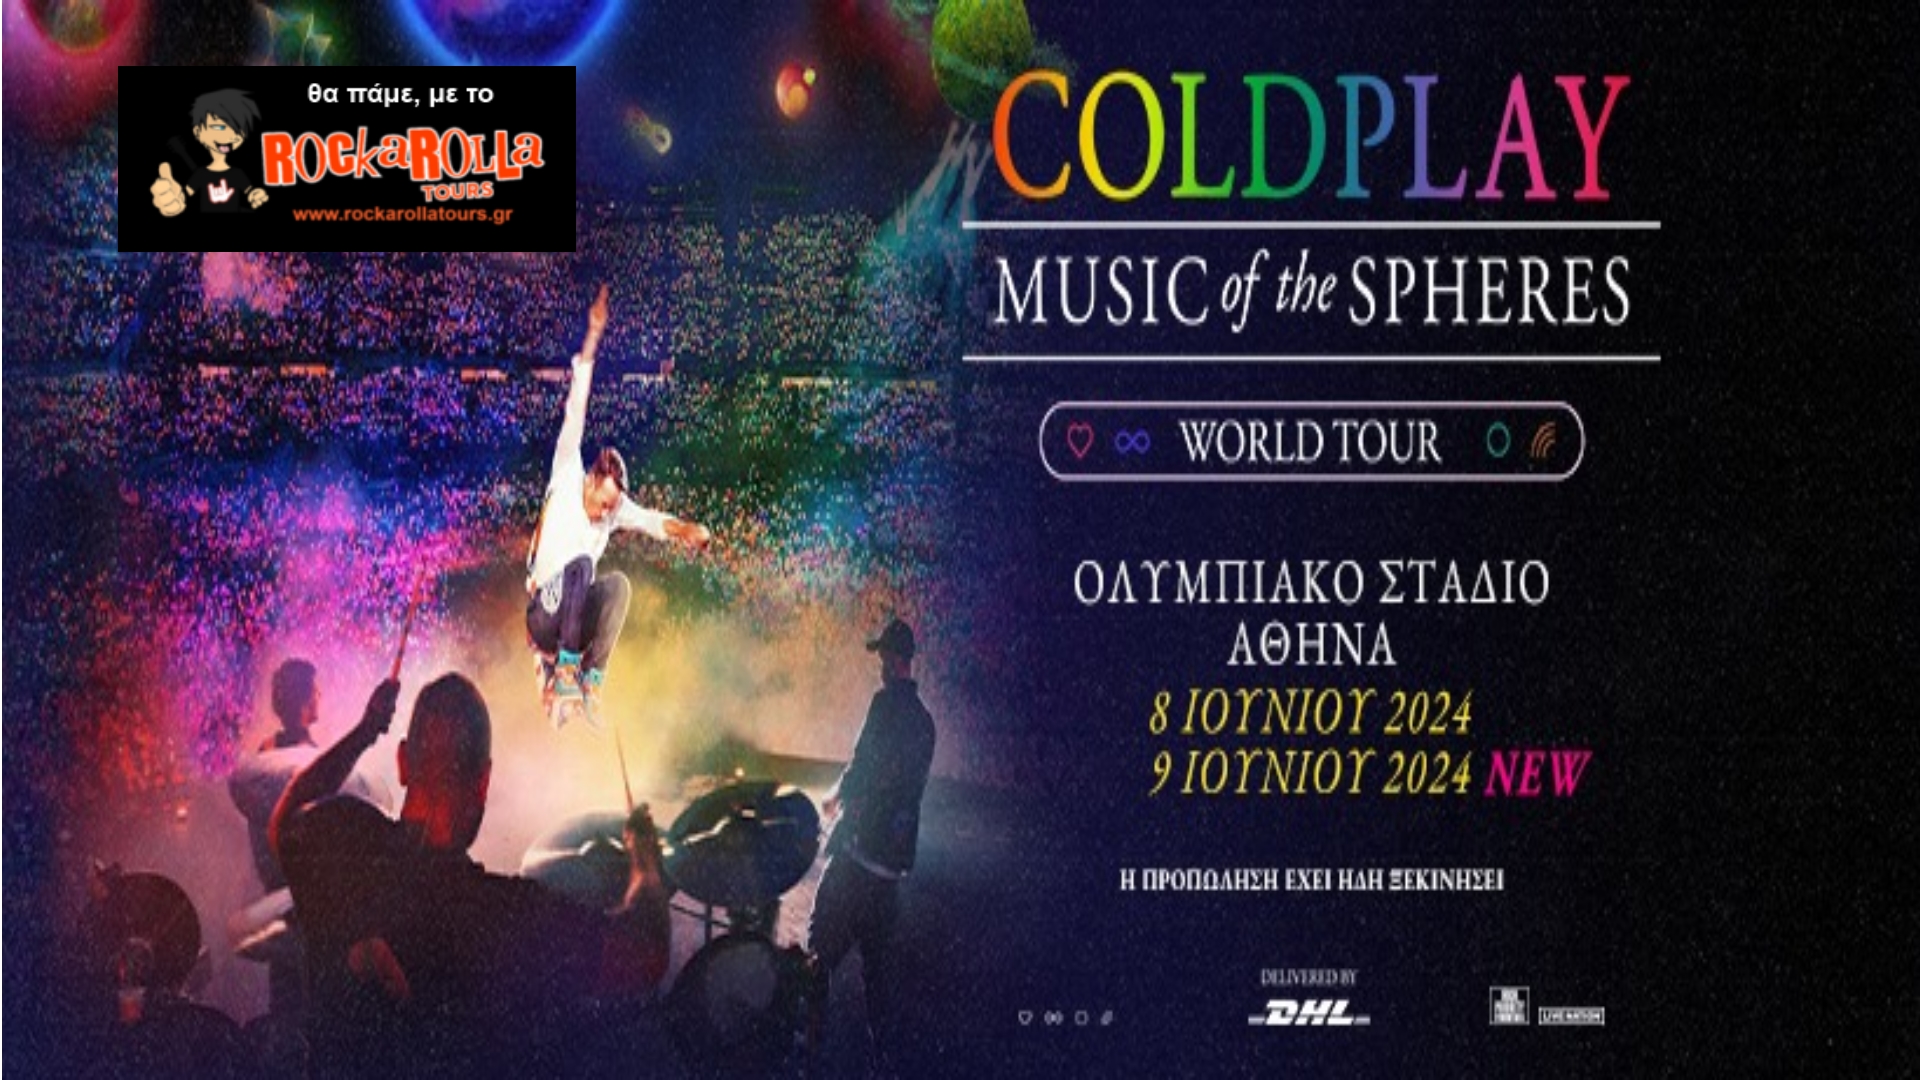 COLDPLAY / ATHENS / 8 & 9.7.2024